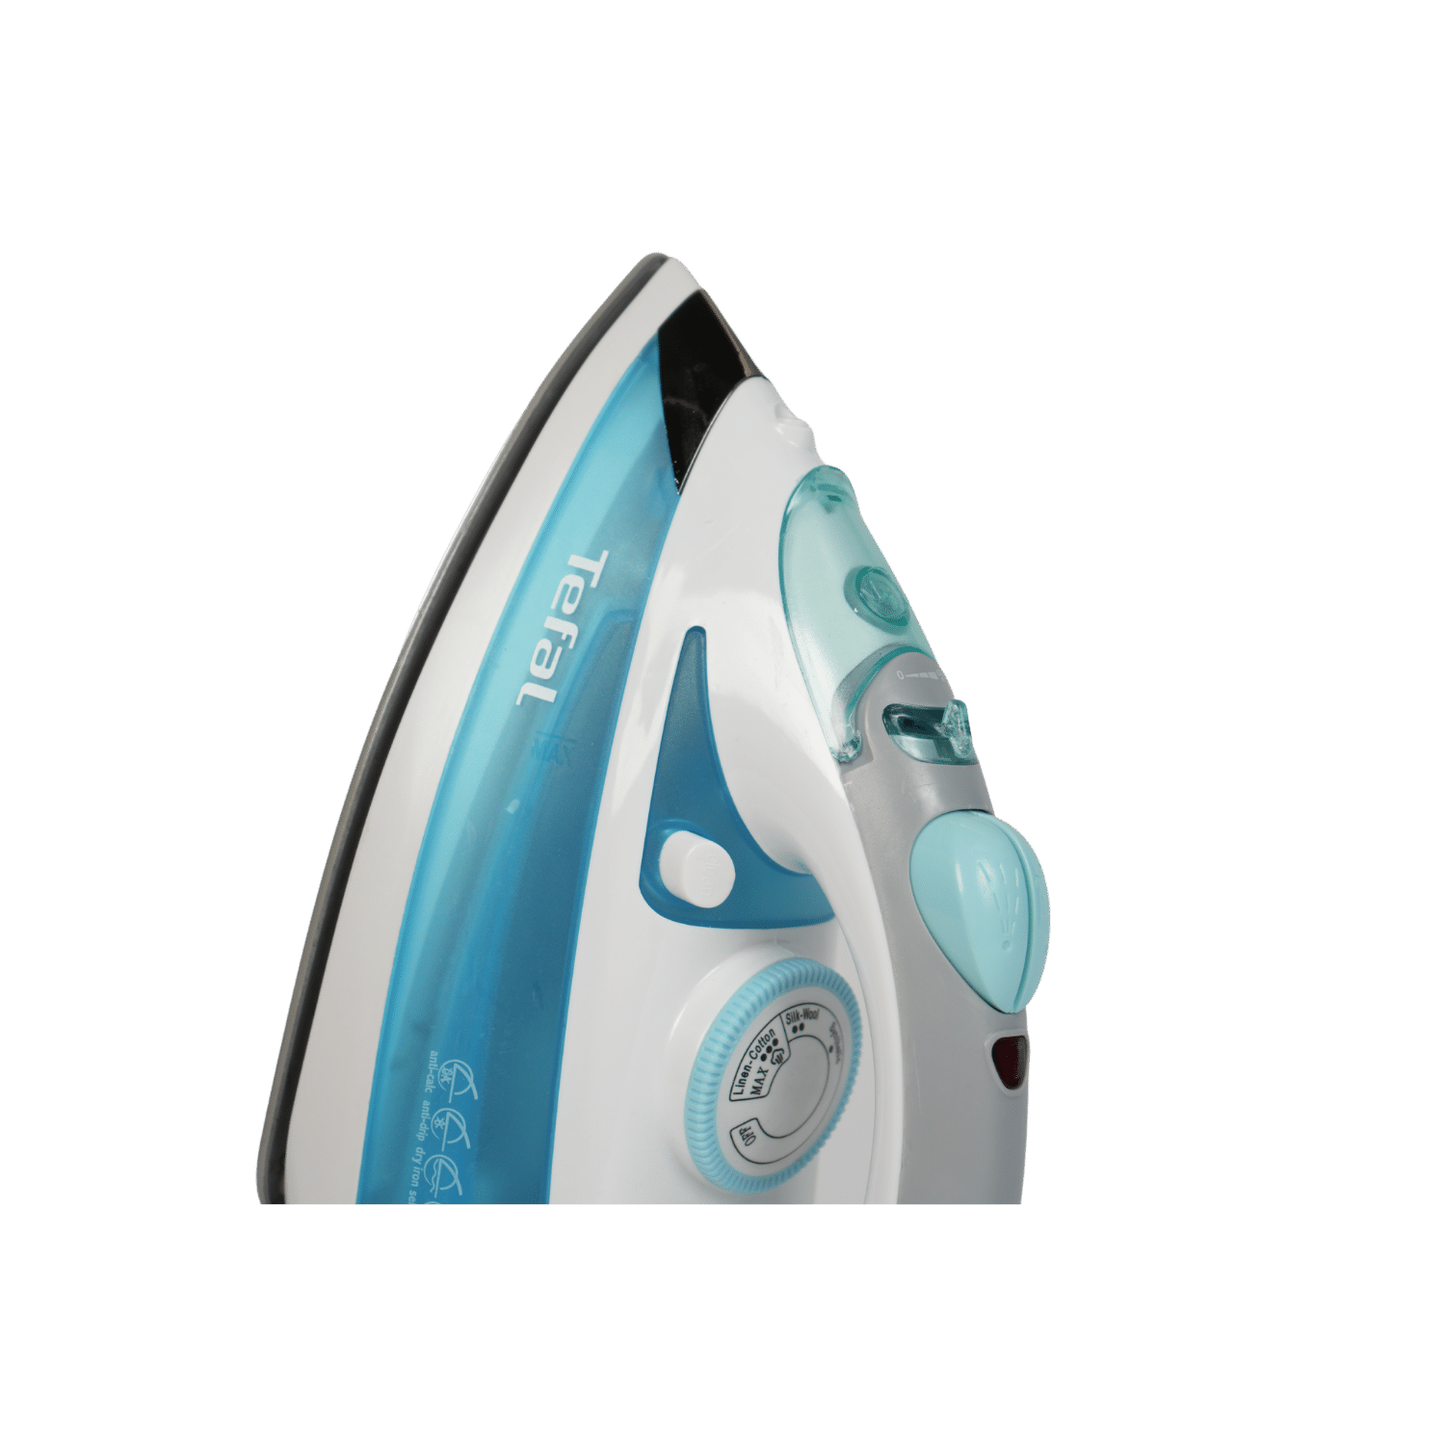 Tefal 2200W Steam Iron Supergliss